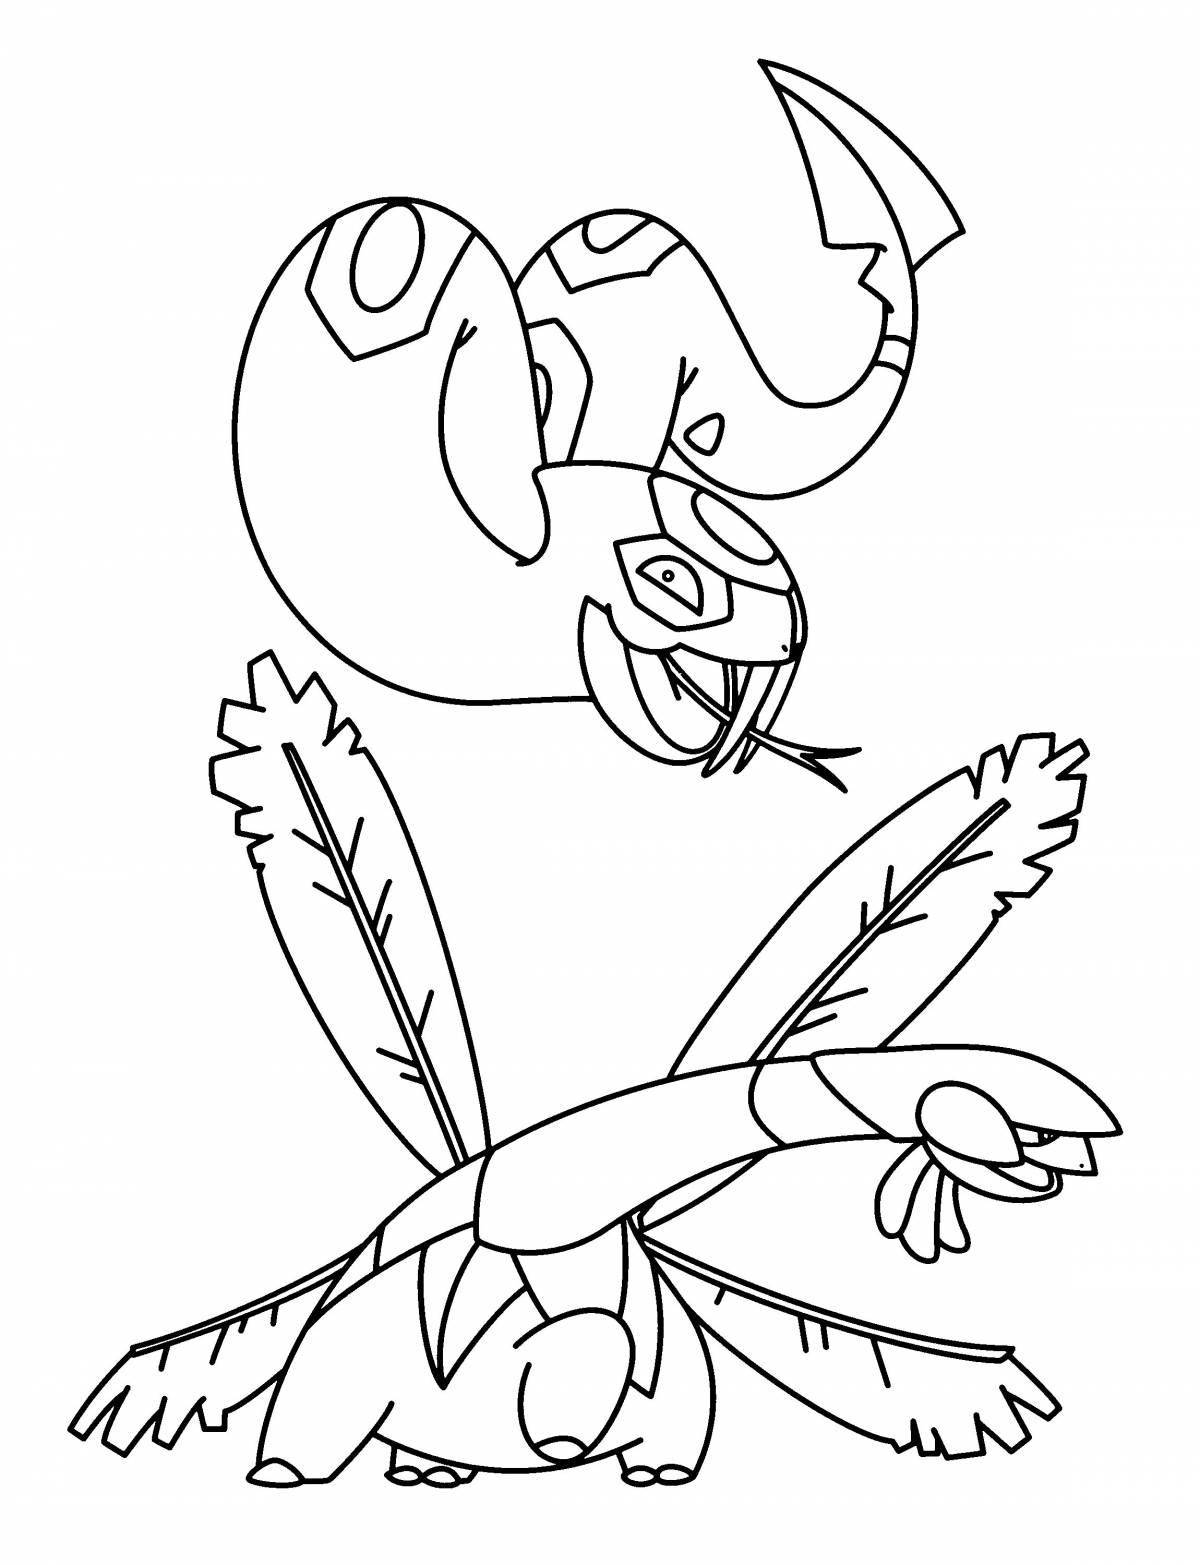 Adorable pokemon coloring pages